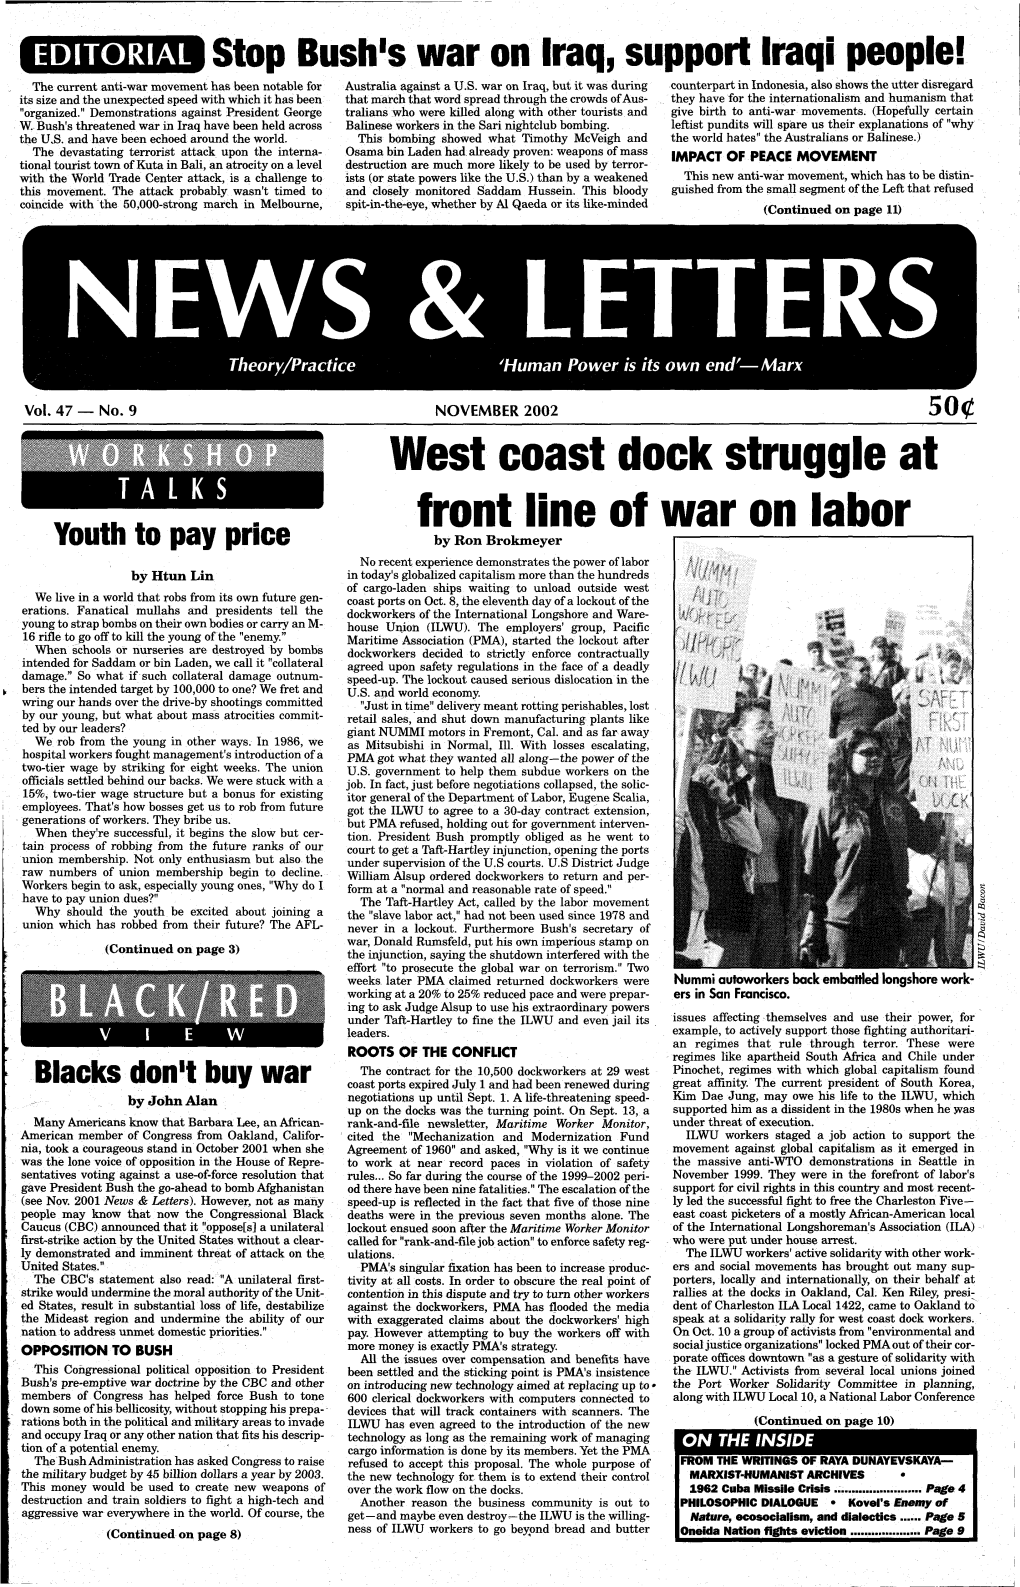 West Coast Dock Struggle at Front Line of War on Labor (Continued from Page 1) up and Technological Innovation Is a Way to Extract Workers) in Several Ways